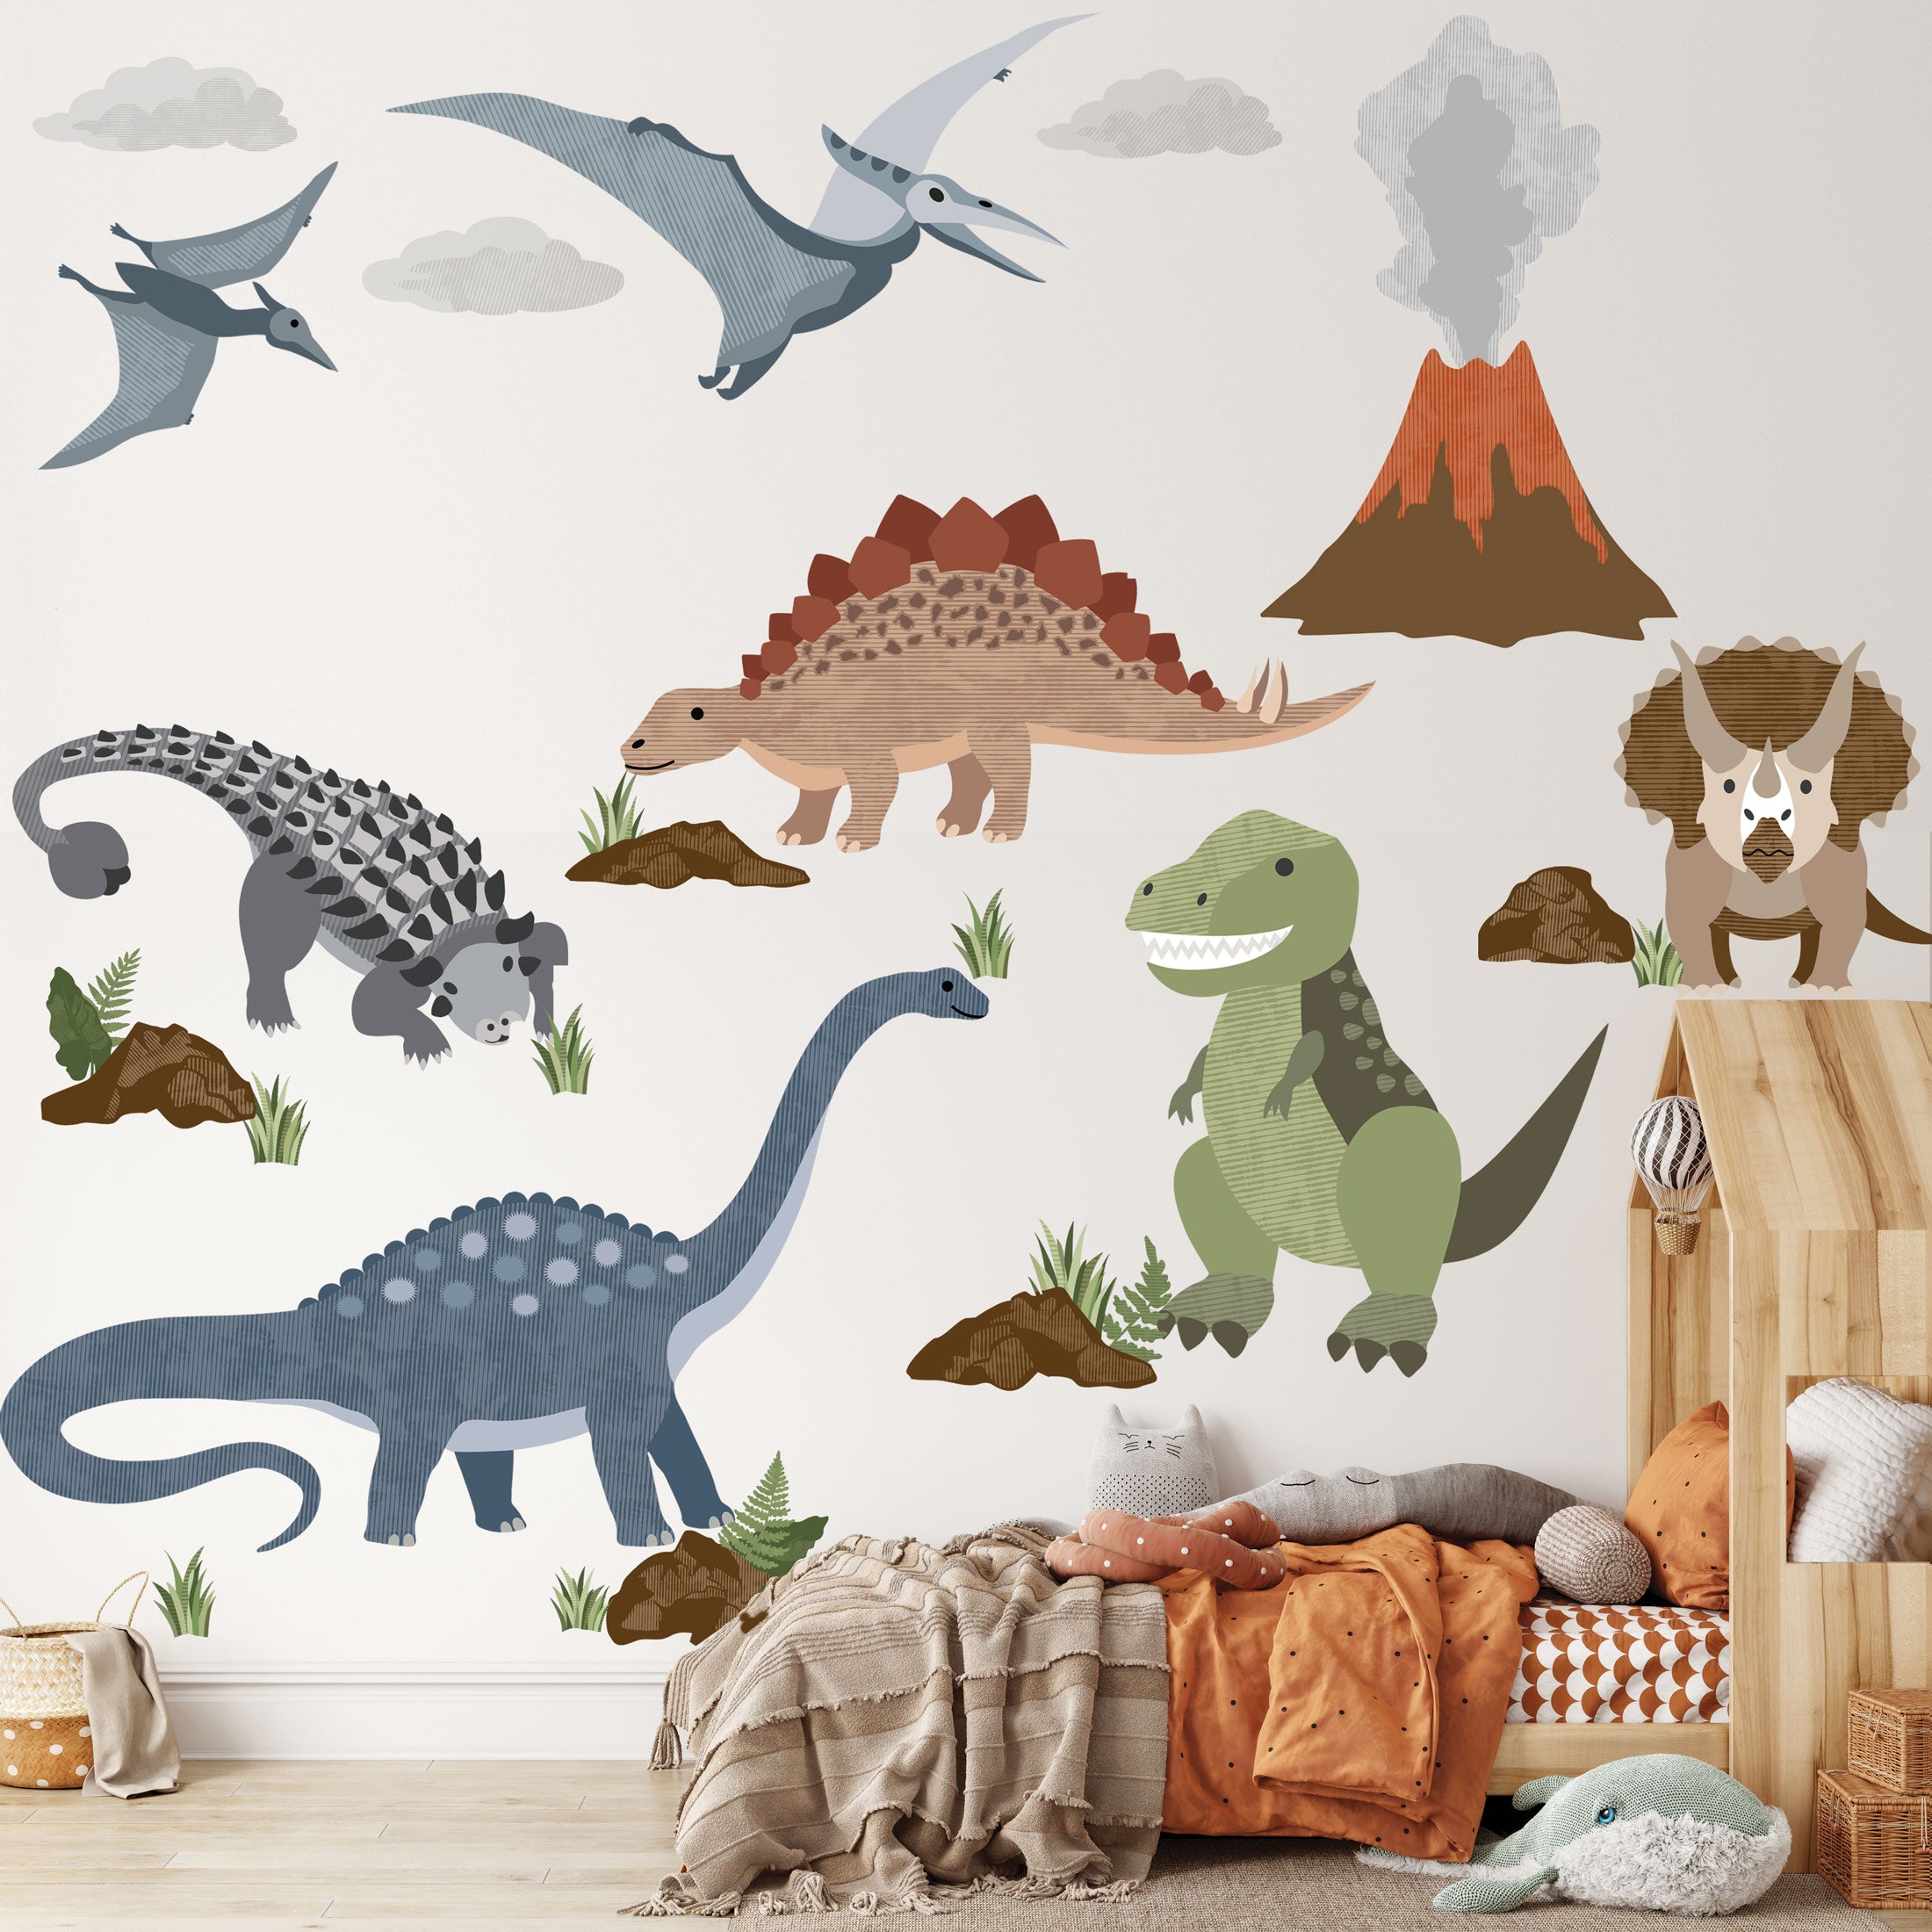 Large Dinosaur Wall Decals, Nursery Wall Stickers, Volcano Wall Decal,  T-Rex Wall Sticker